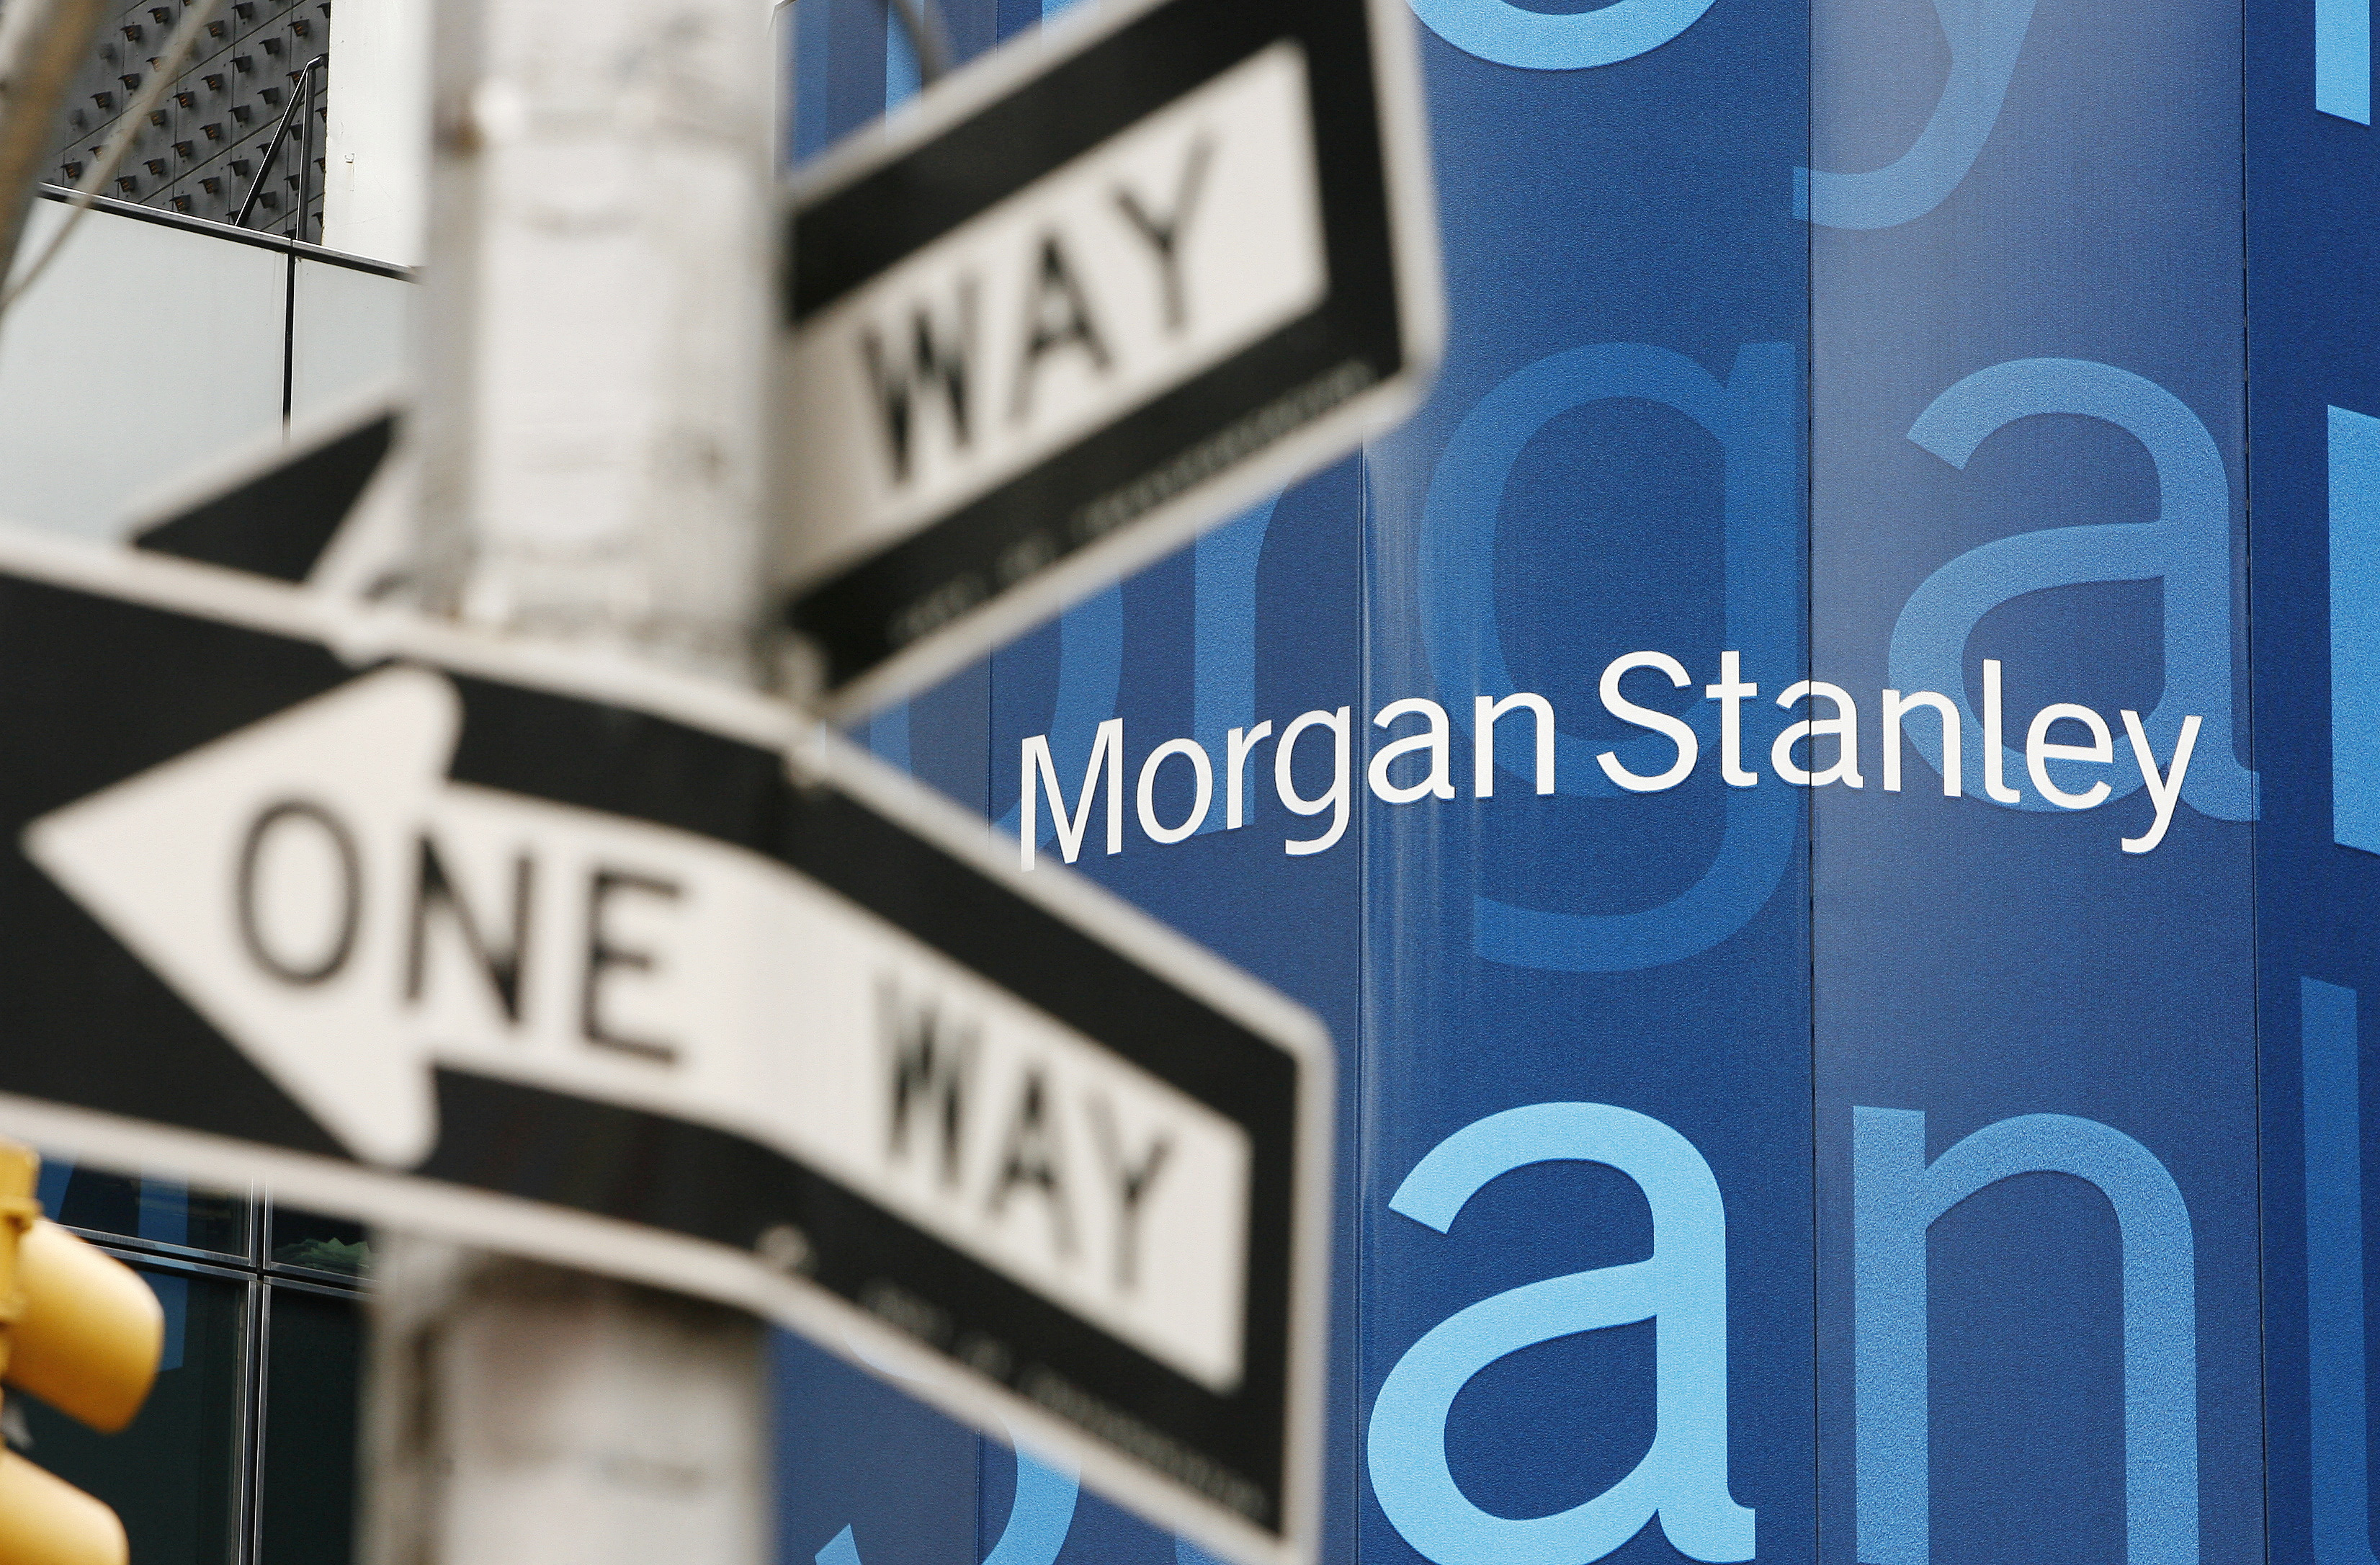 A street sign stands near the Morgan Stanley worldwide headquarters building in New York